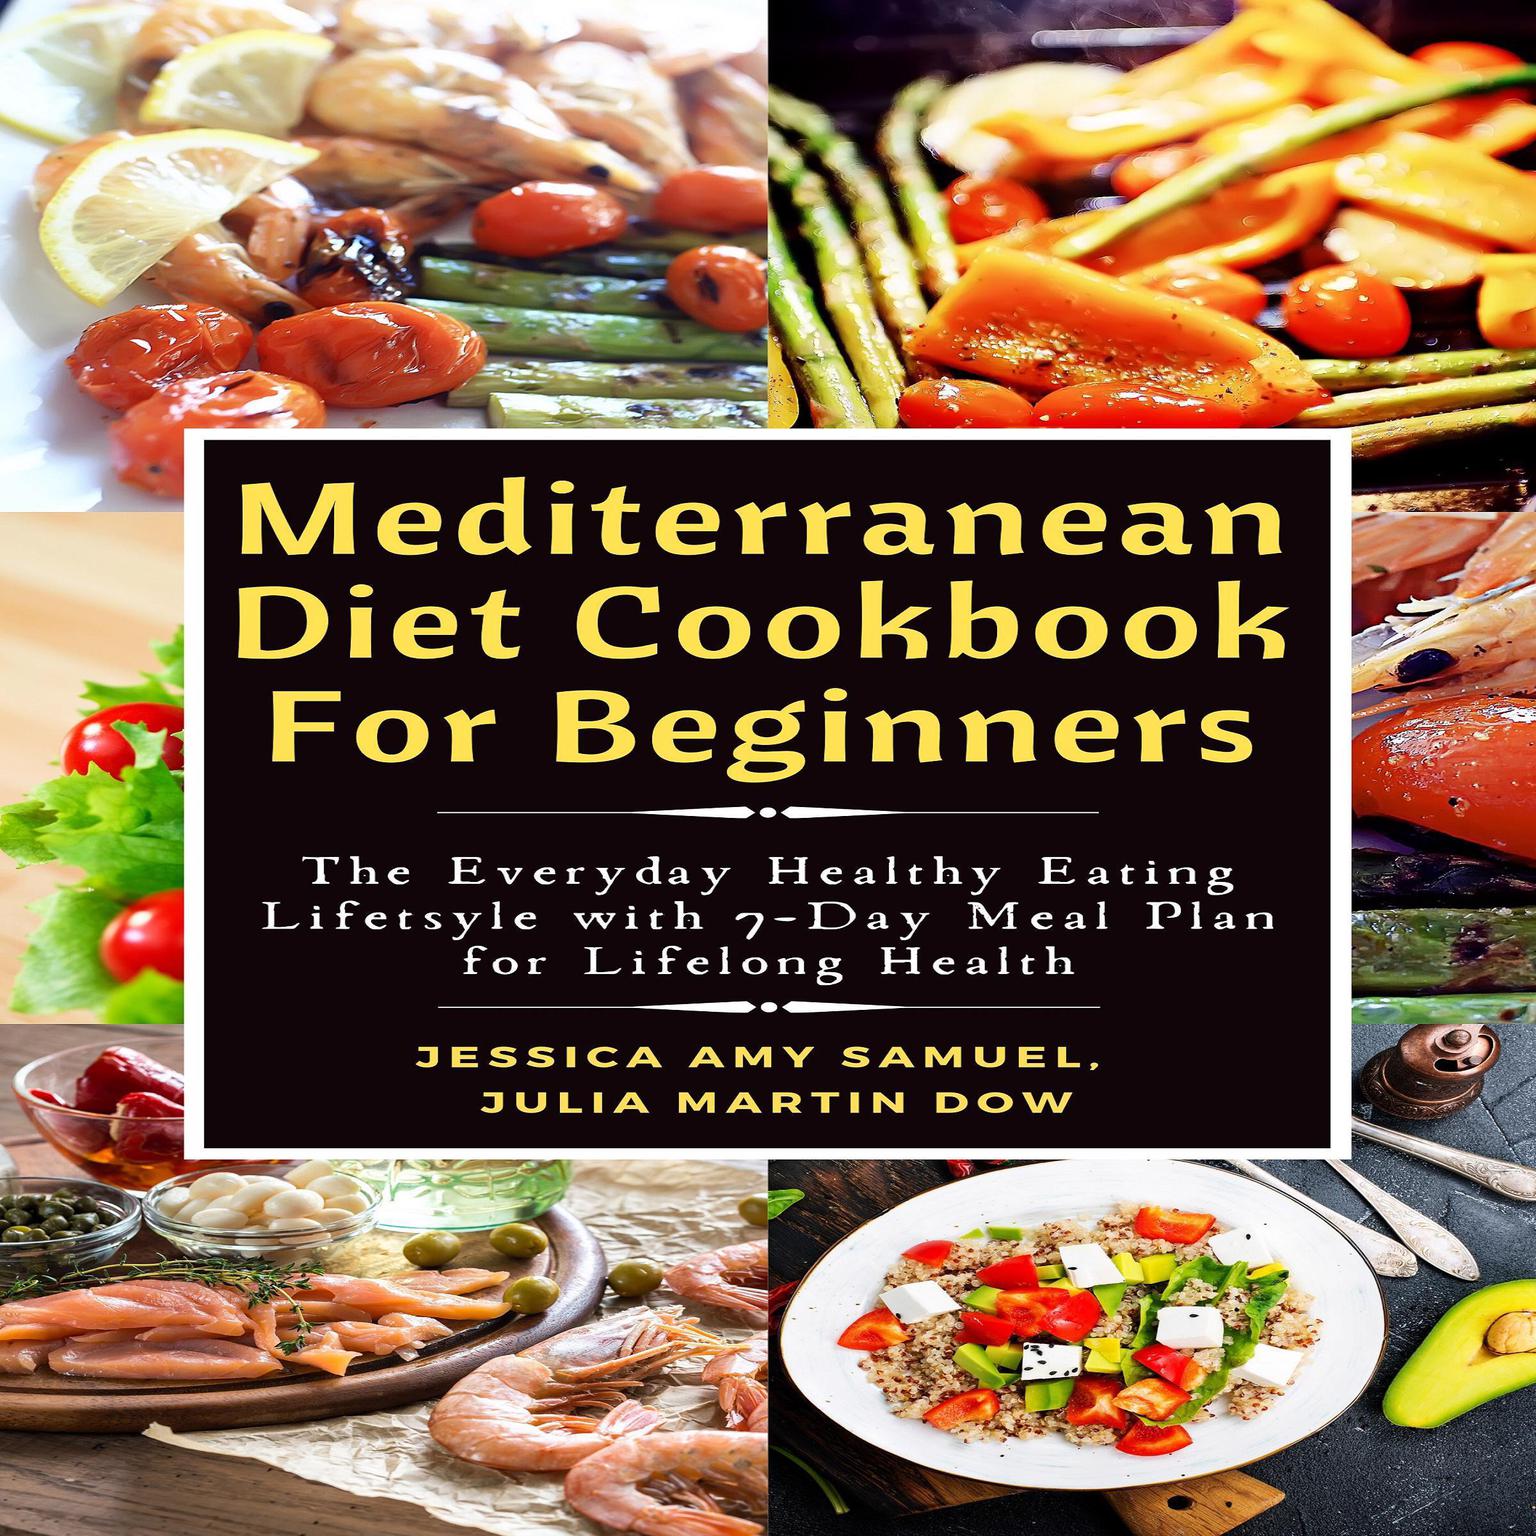 Mediterranean Diet Cookbook For Beginners: The Everyday Healthy Eating Lifestyle with 7-Day Meal Plan for Lifelong Health Audiobook, by Jessica Amy Samuel